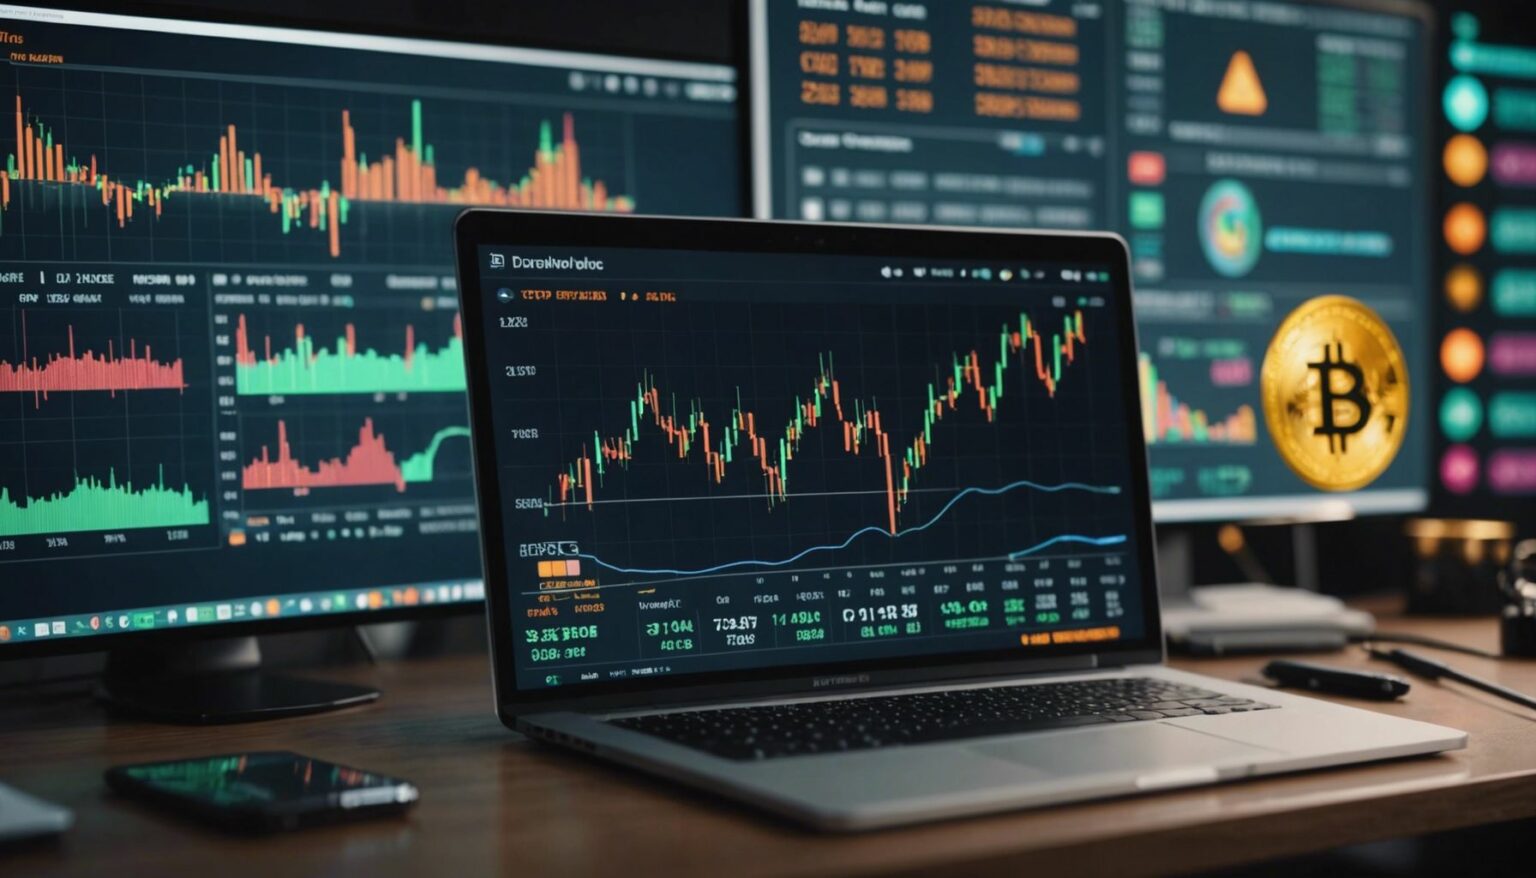 Futuristic trading interface with cryptocurrency symbols, charts, and graphs, showcasing dynamic crypto trading.